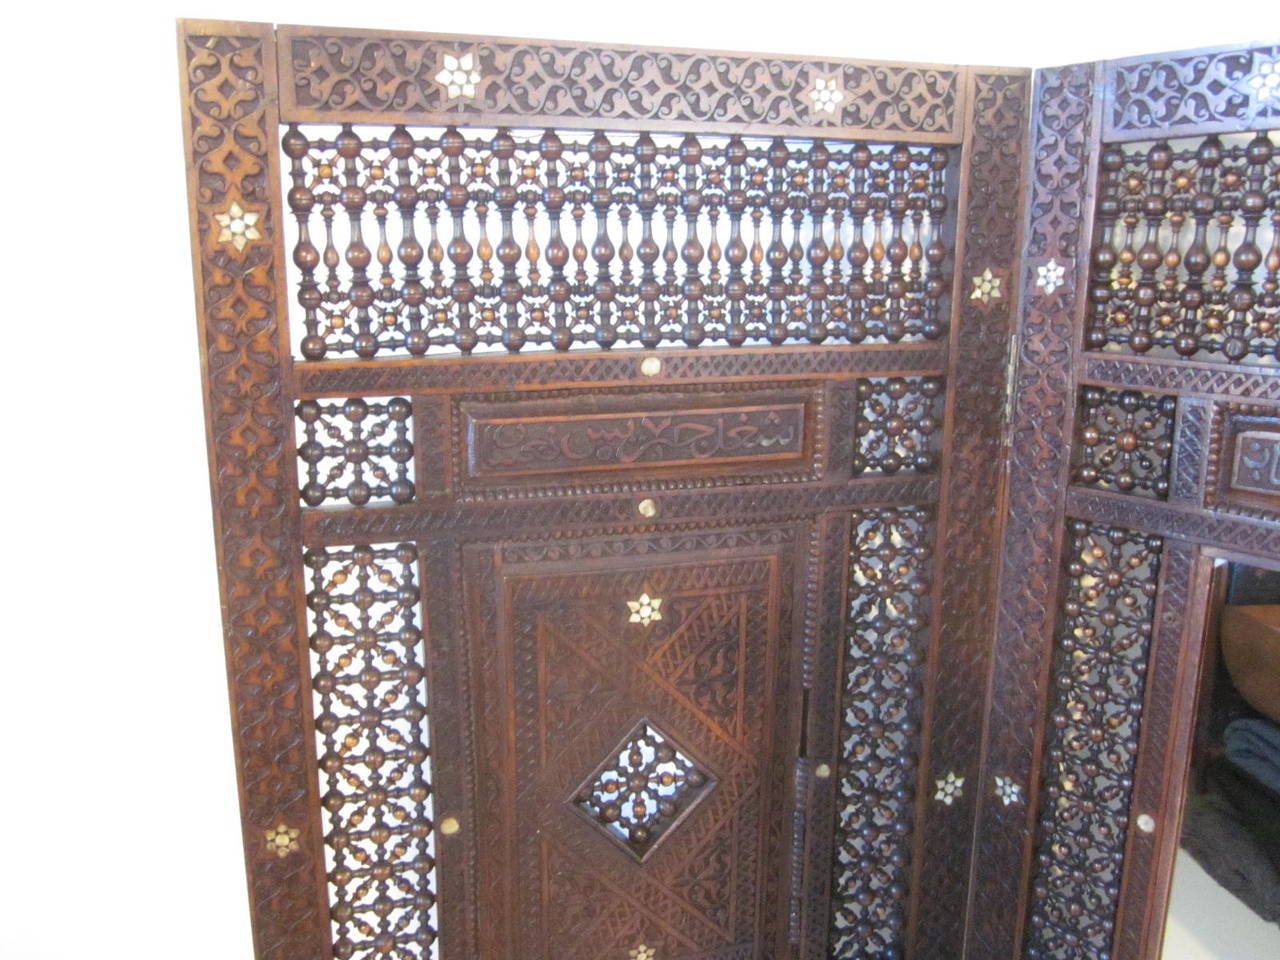 A three-panel Moroccan room divider with turned and carved wood details, ivory like inlay and mirror. From the estate of a noted Cincinnati architect bought in the east and retains the tag from their ownership in the 1960s.